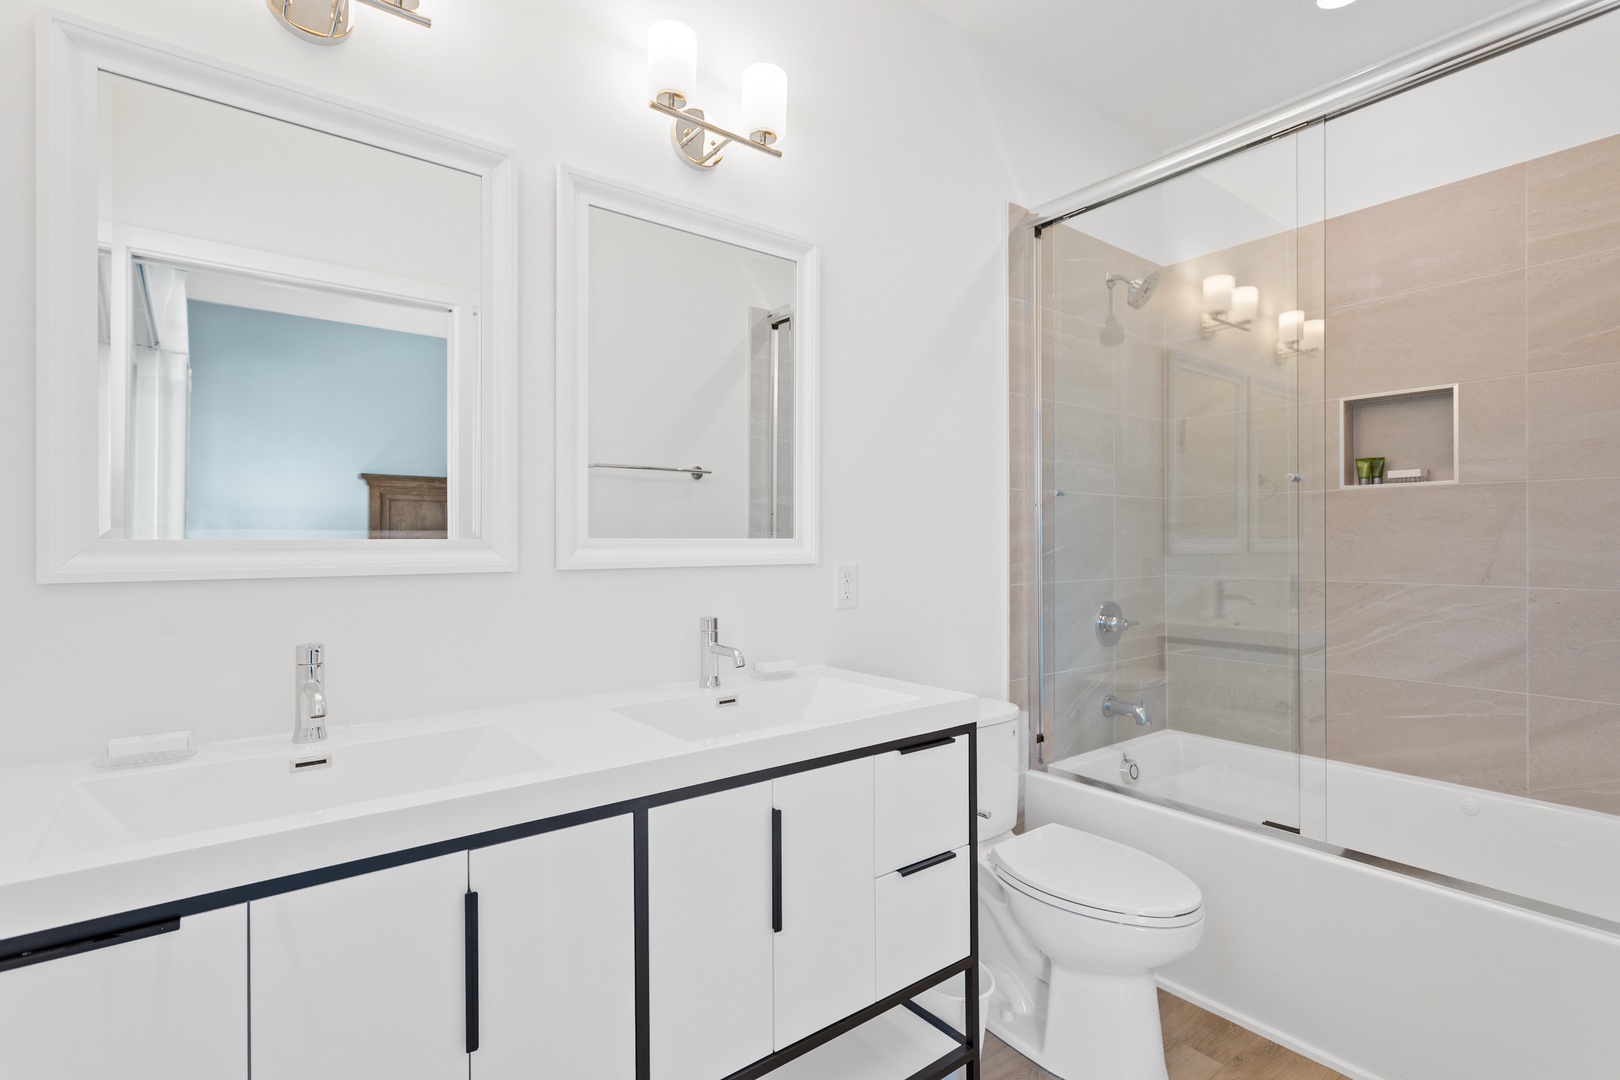 The primary ensuite bathroom with a double vanity and shower-tub combination